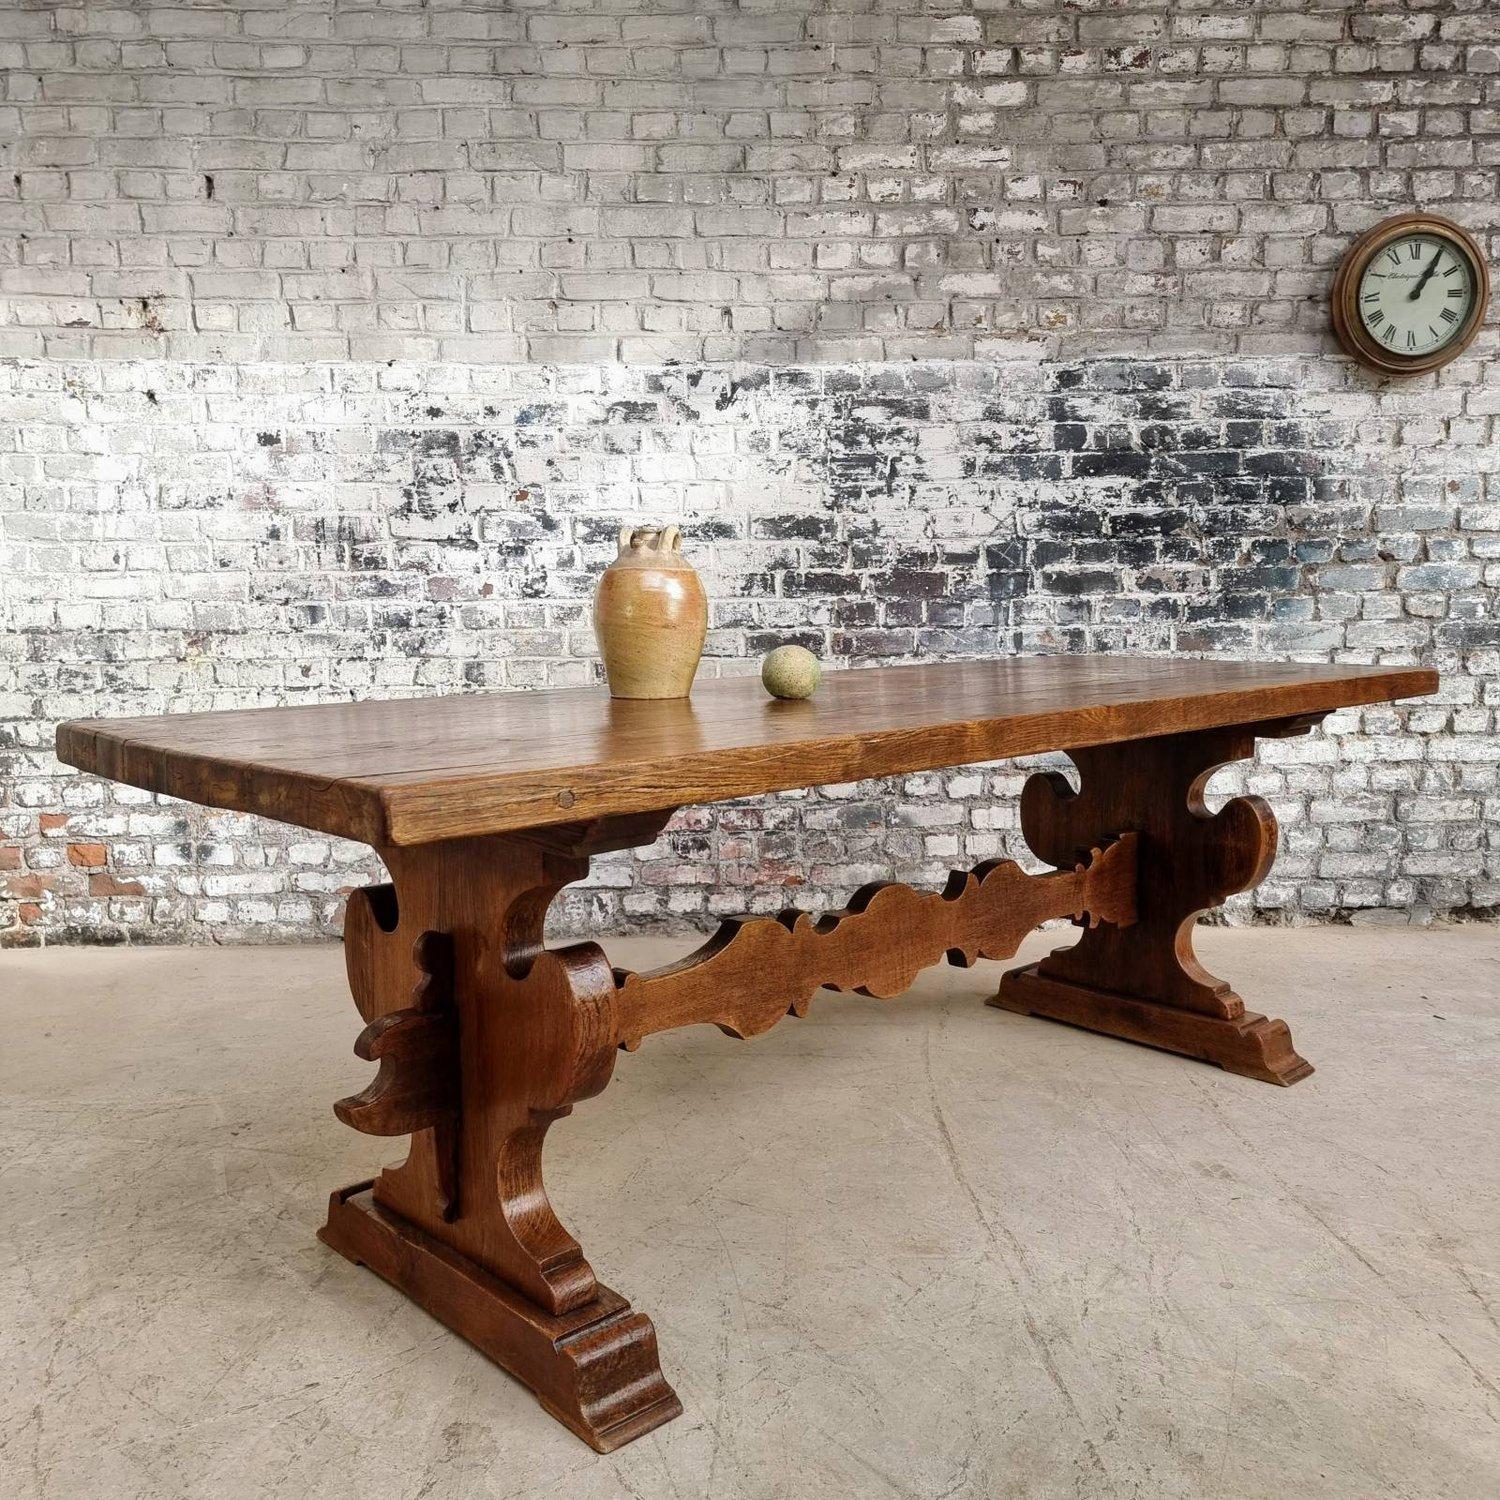 This stunning French late 19th century oak table features an eye-catching decorative stretcher, and it is a vintage treasure that exudes elegance and character. Likely sourced from a ski resort, it is made of solid oak and features a rich,